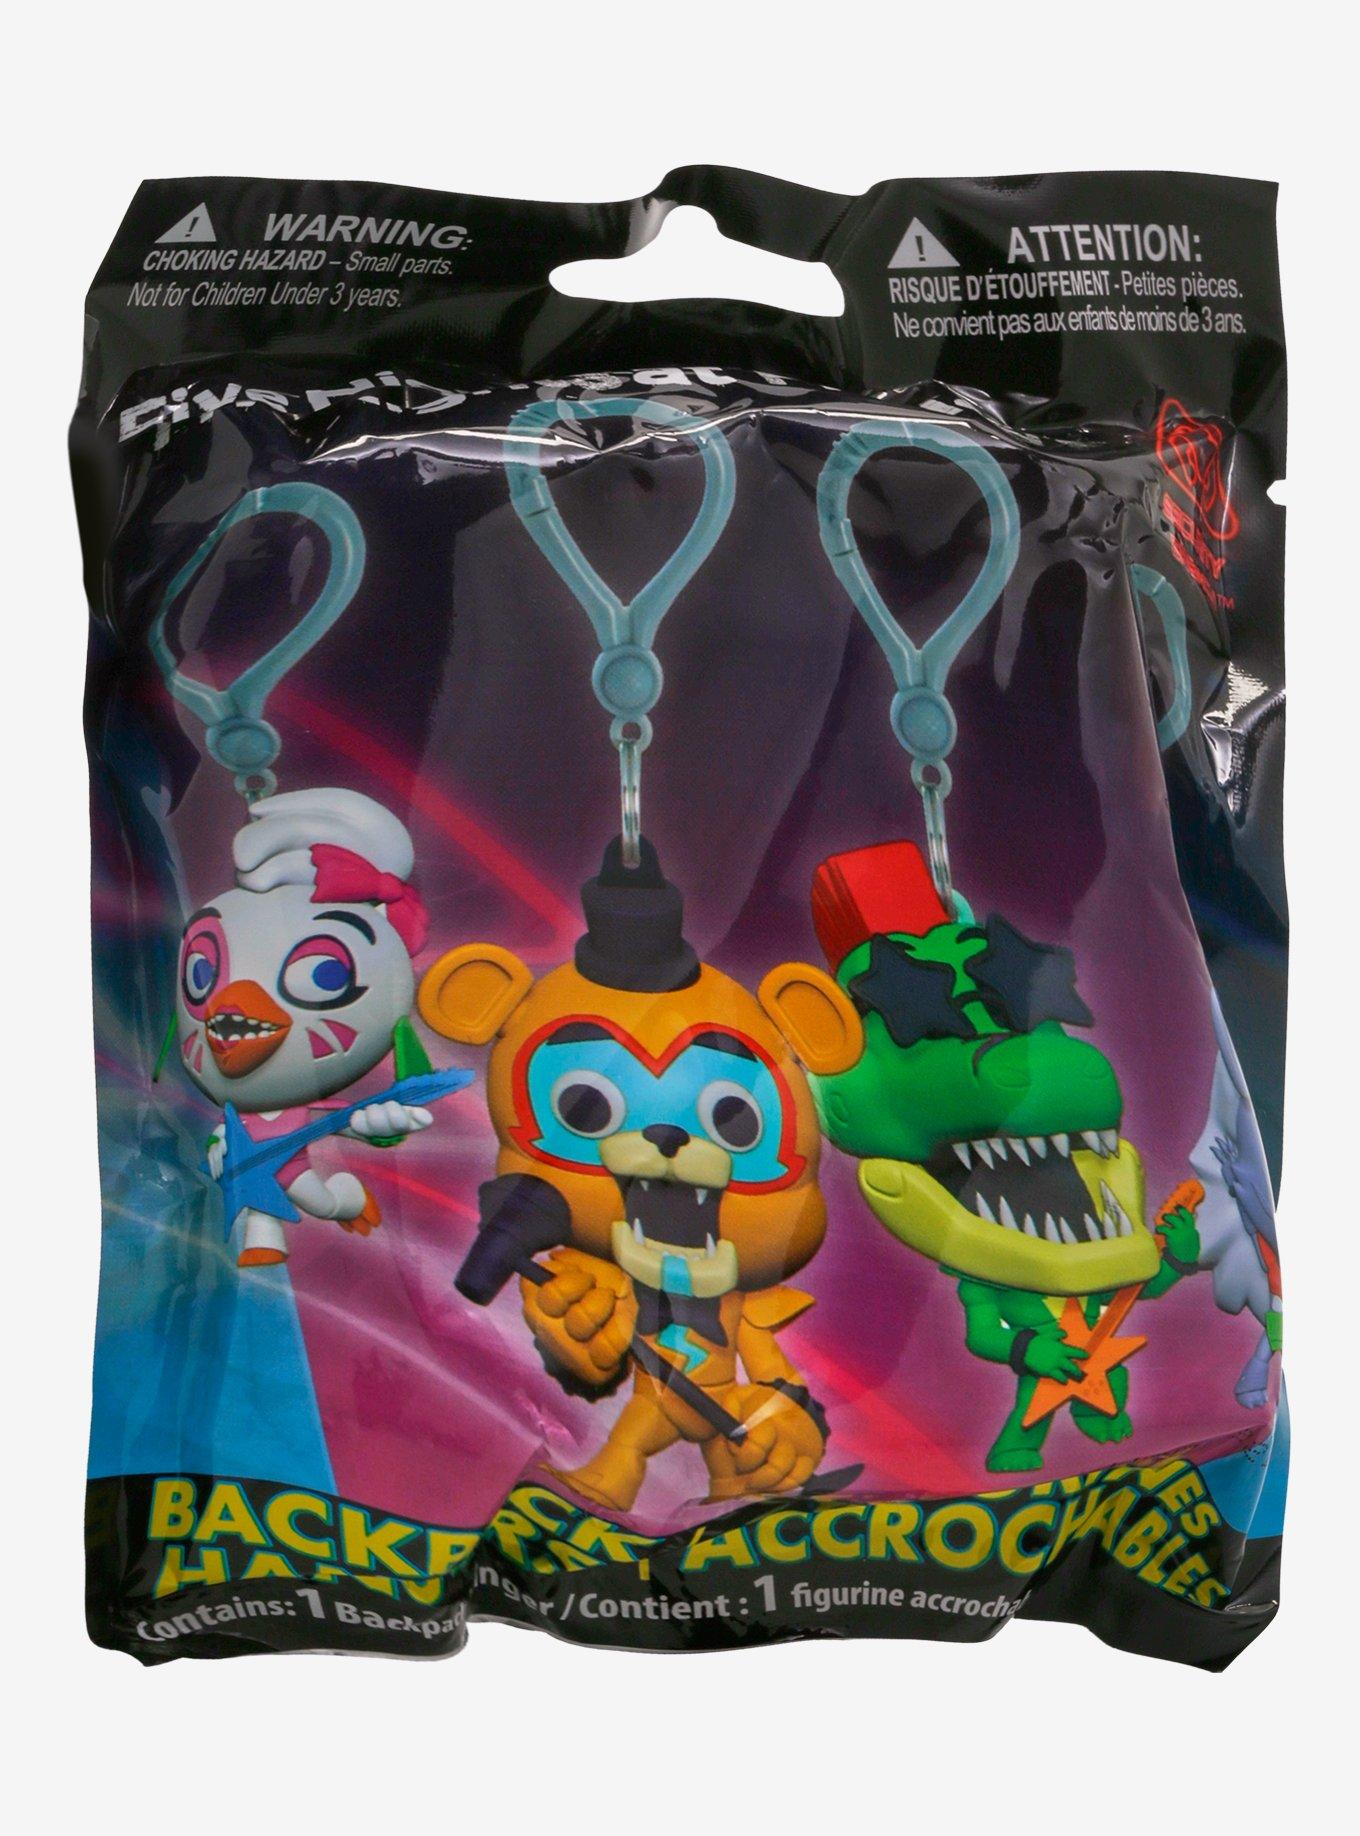 Five Nights At Freddy's: Security Breach Blind Bag Key Chain, , hi-res